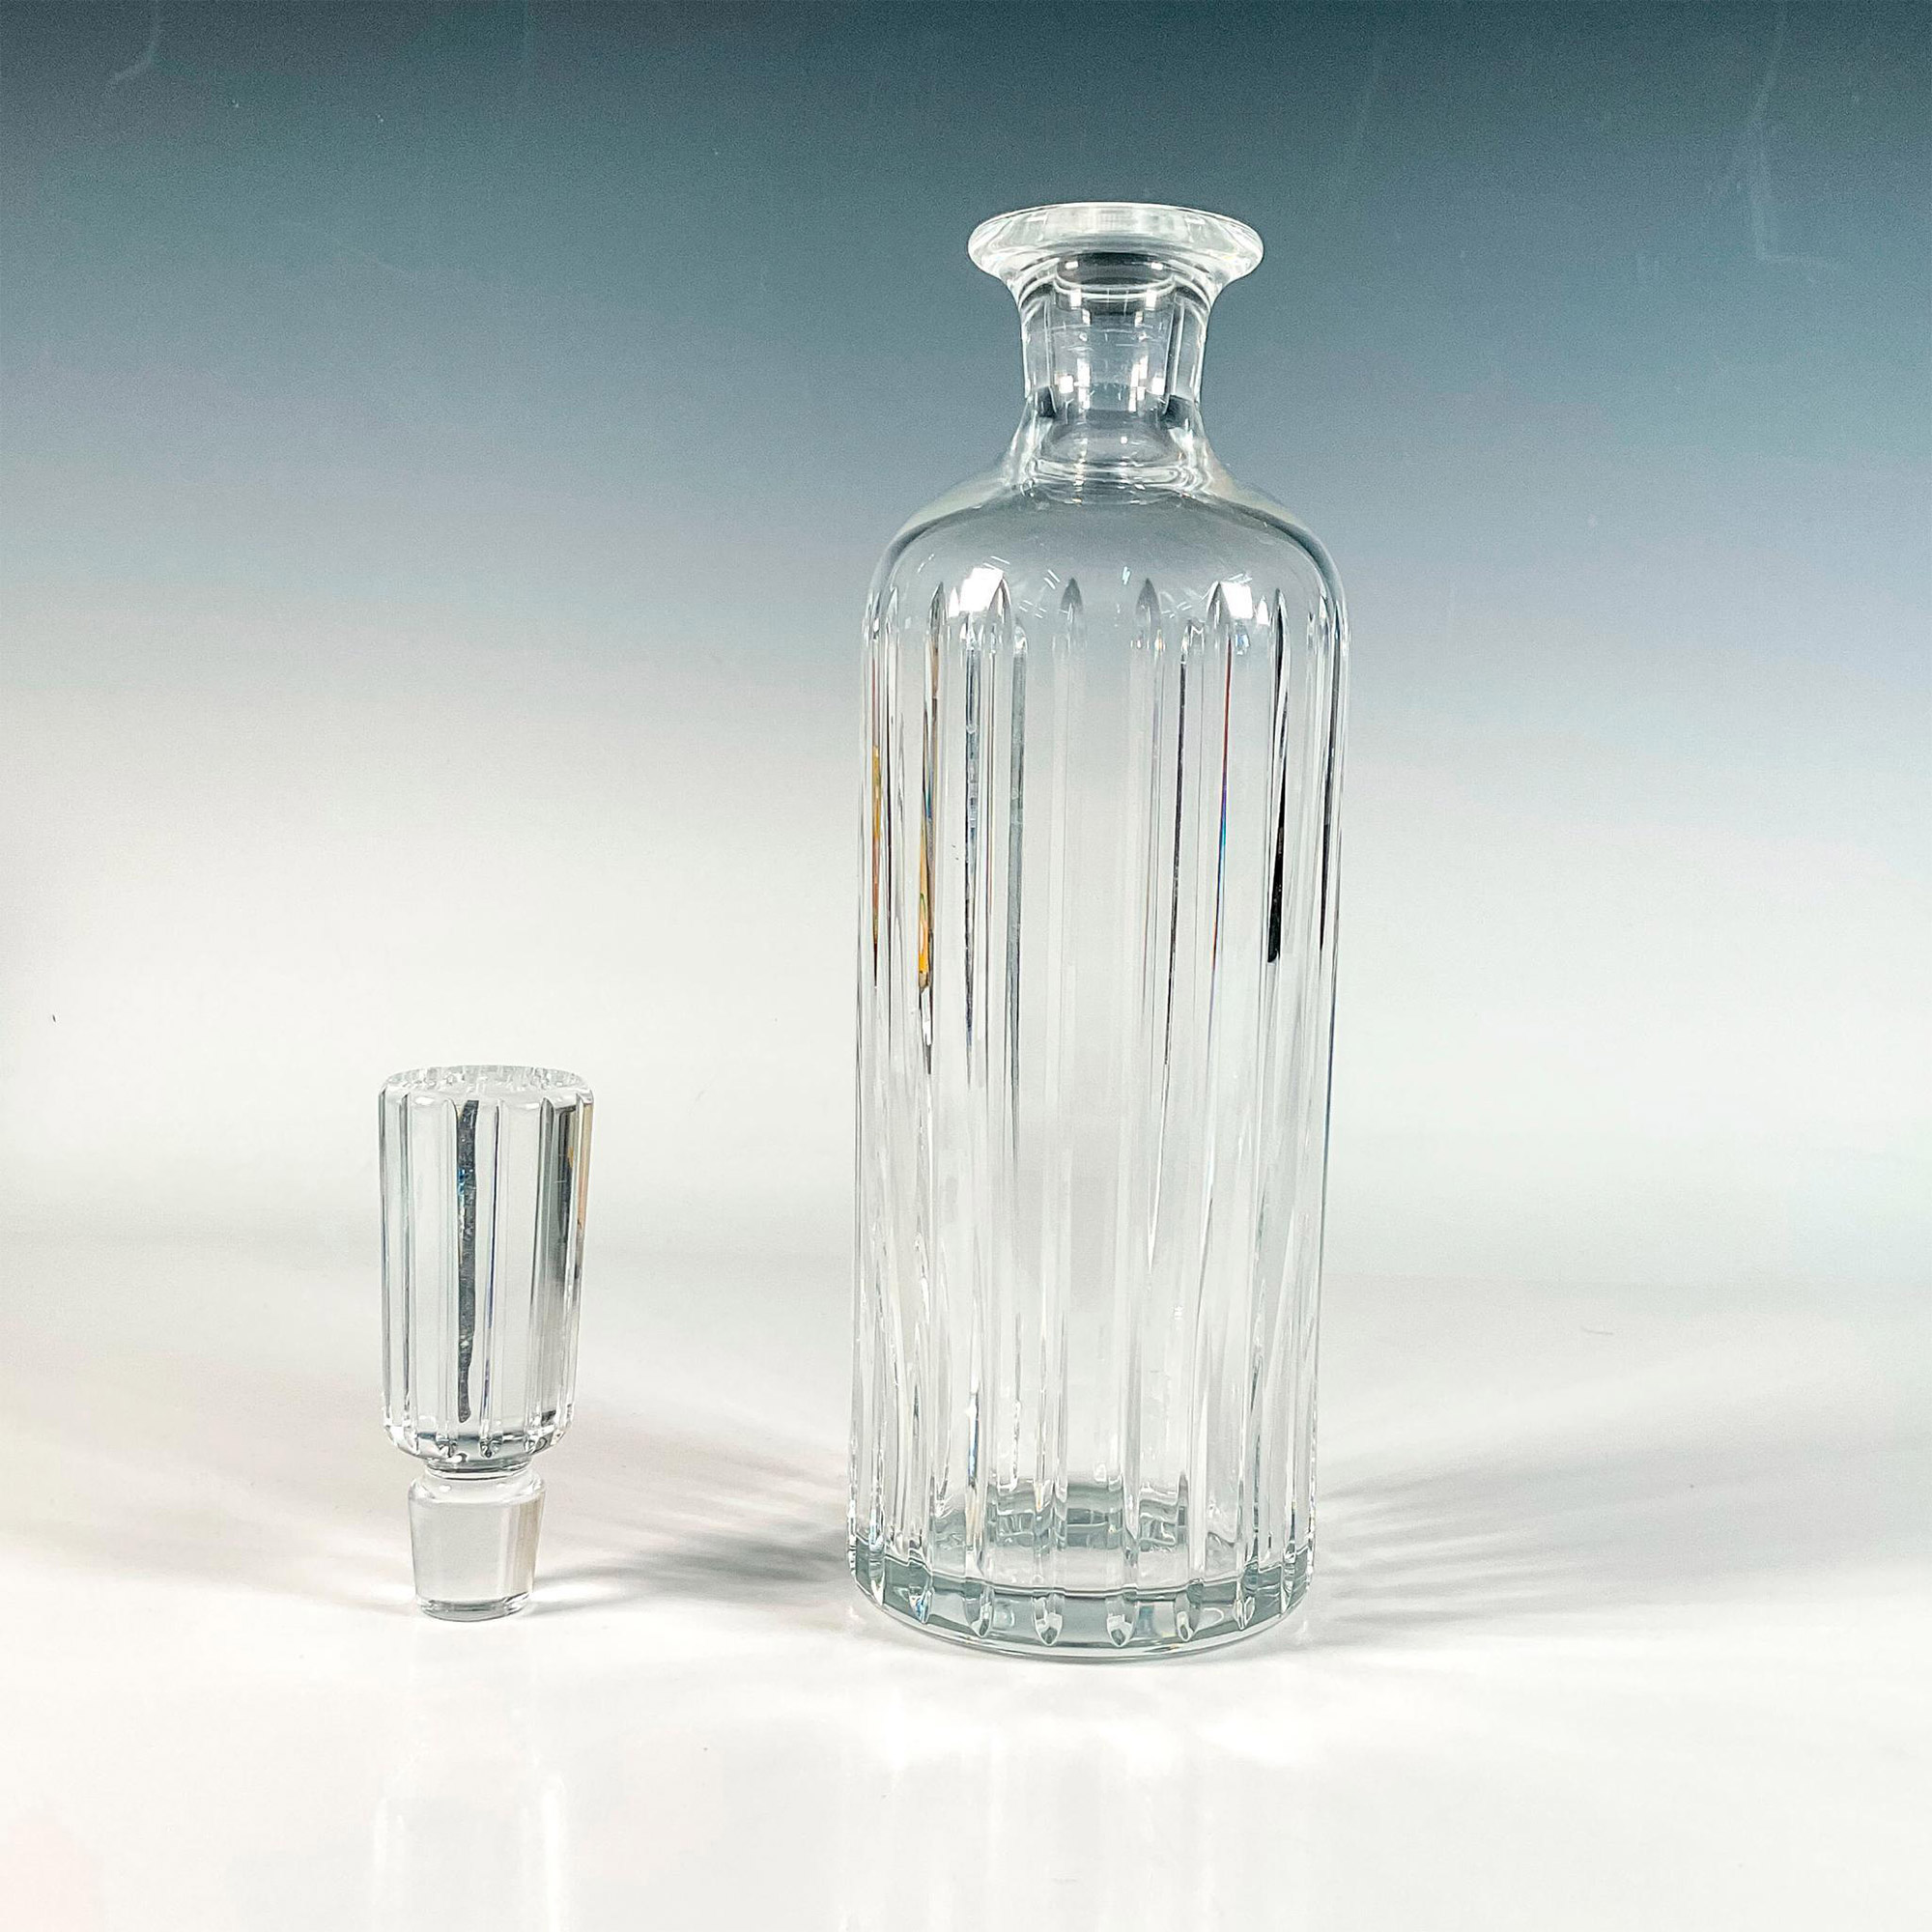 Baccarat Crystal Decanter with Stopper, Harmonie - Image 2 of 4